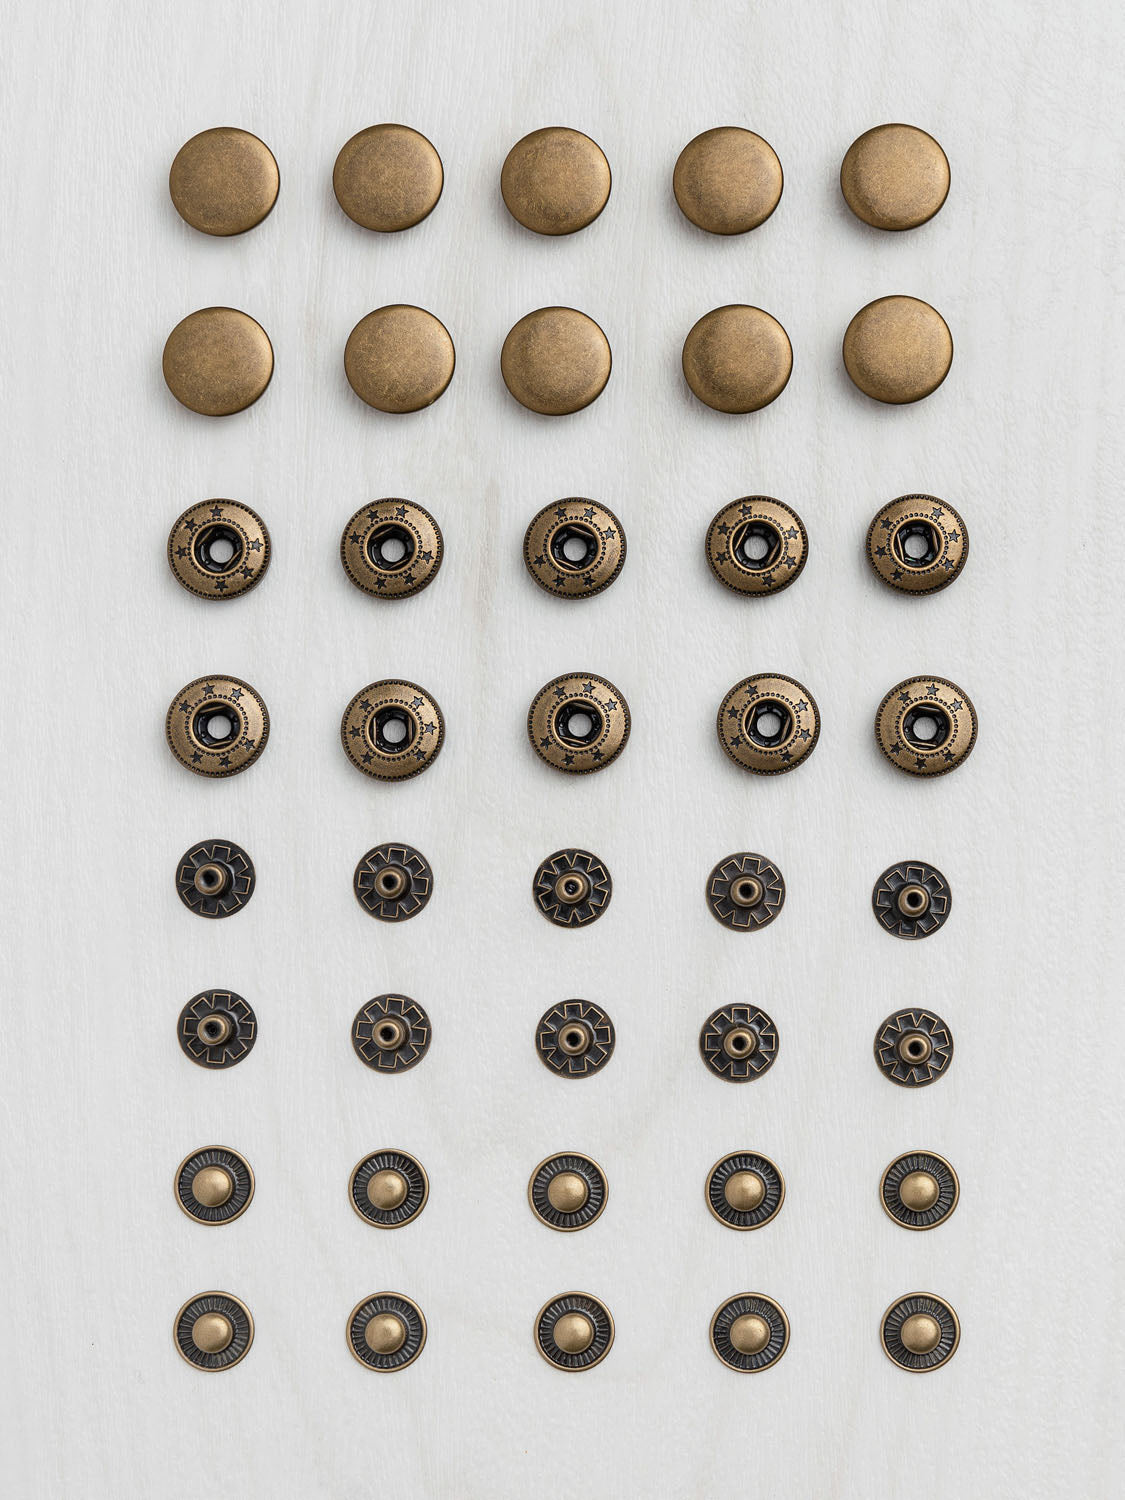 Premium Spring Snap Fasteners / Metal Snap Buttons